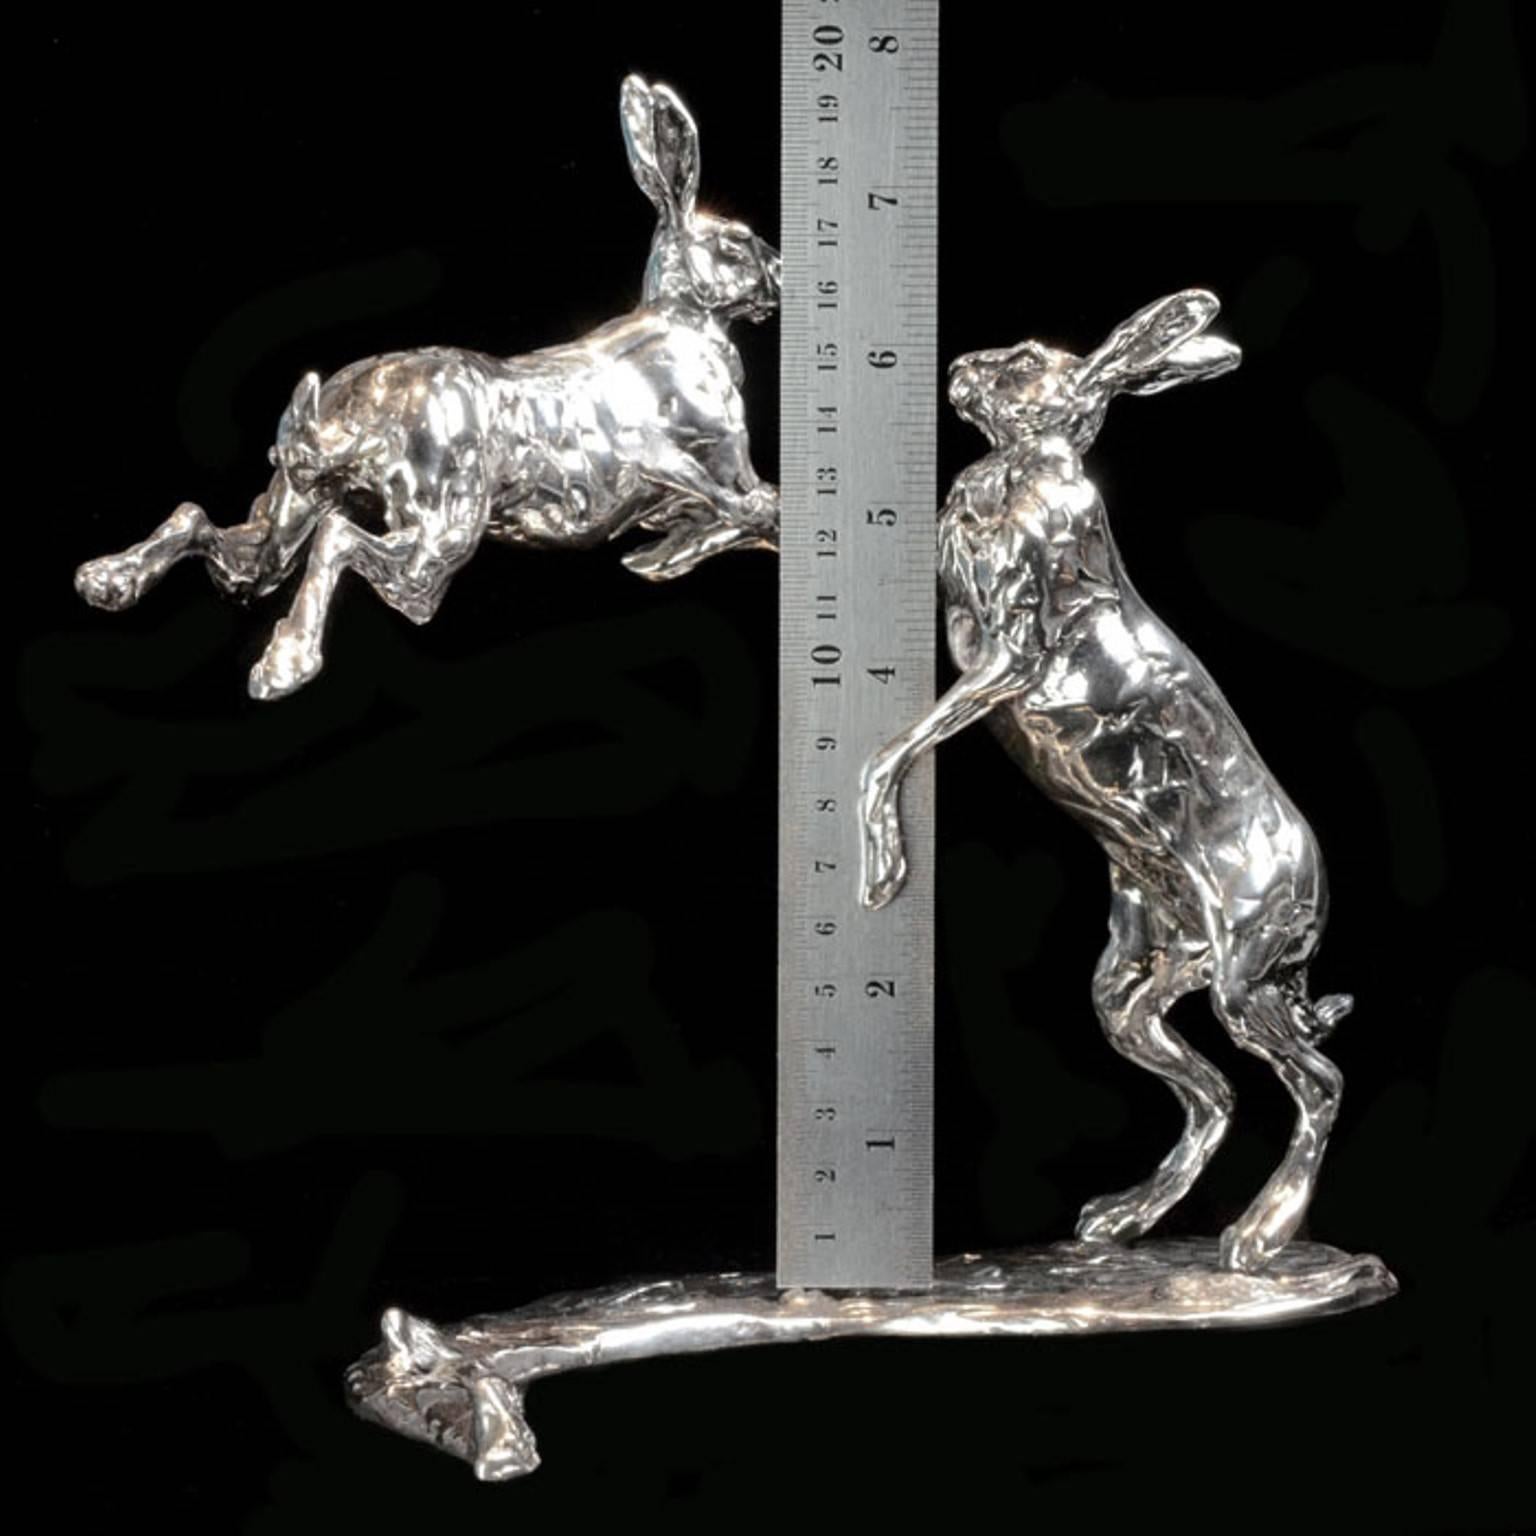 A ‘Leaping Hares’ sterling silver sculpture by Lucy Kinsella, the limited edition finely modelled pair of long eared hares caught mid confrontation with one stood tall on stretched hind legs, the other leaping through the air, front legs